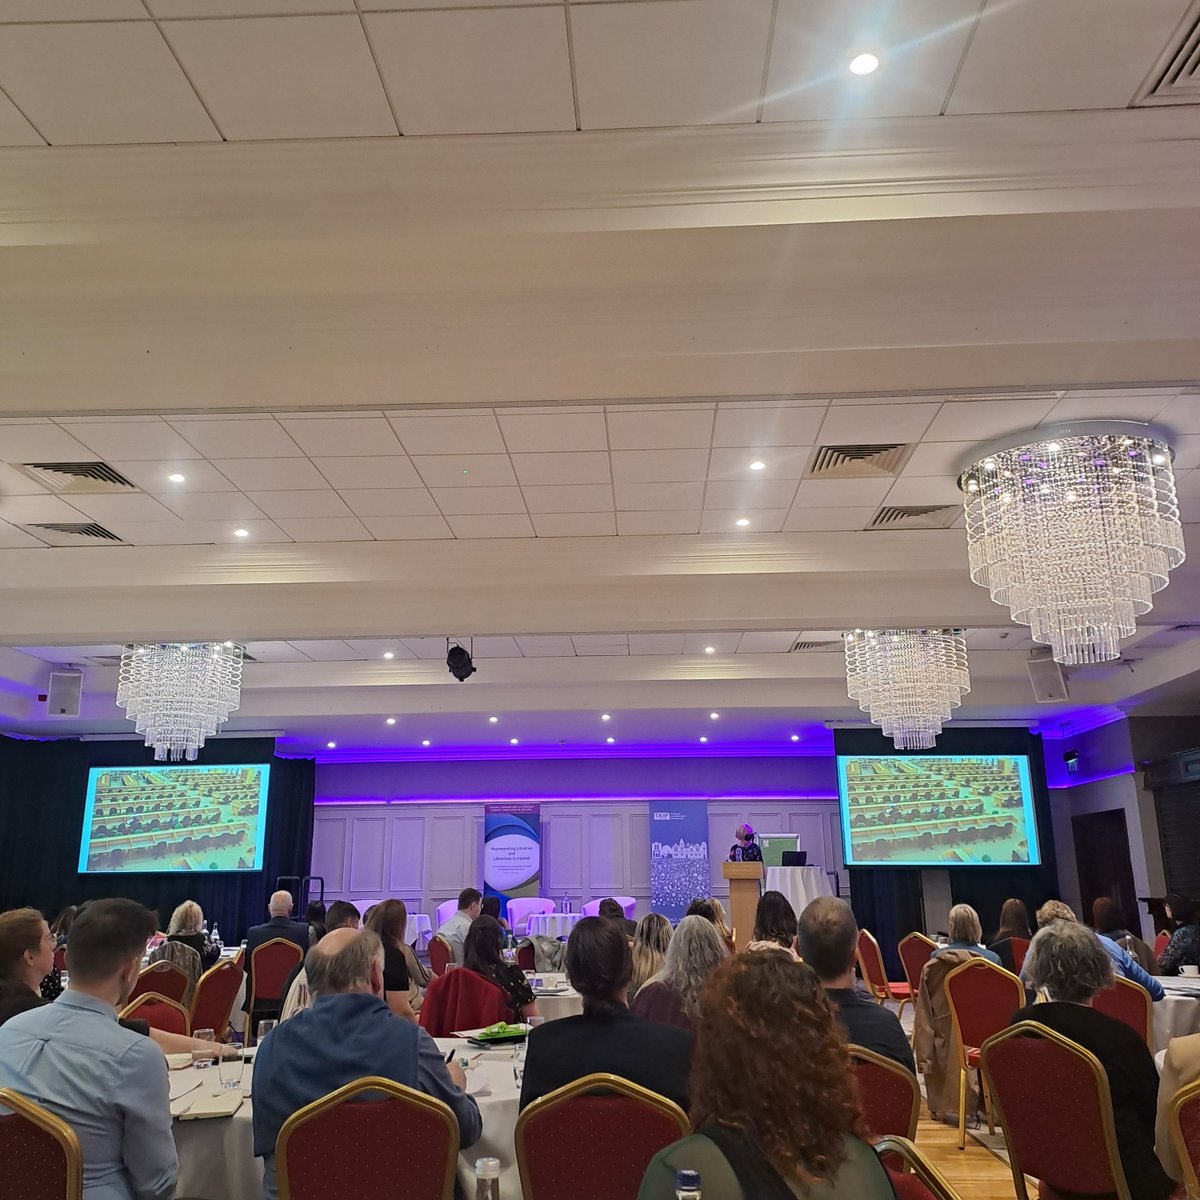 We are delighted to be attending @CILIPIreland in Newry today, with a plenary from our Membership Manager at 13.45. The day has begun on a strong note with Janet Peden from @UlsterUniLib talking about the reimagination of @UlsterUni services across campuses. #CILIPIreLAI24